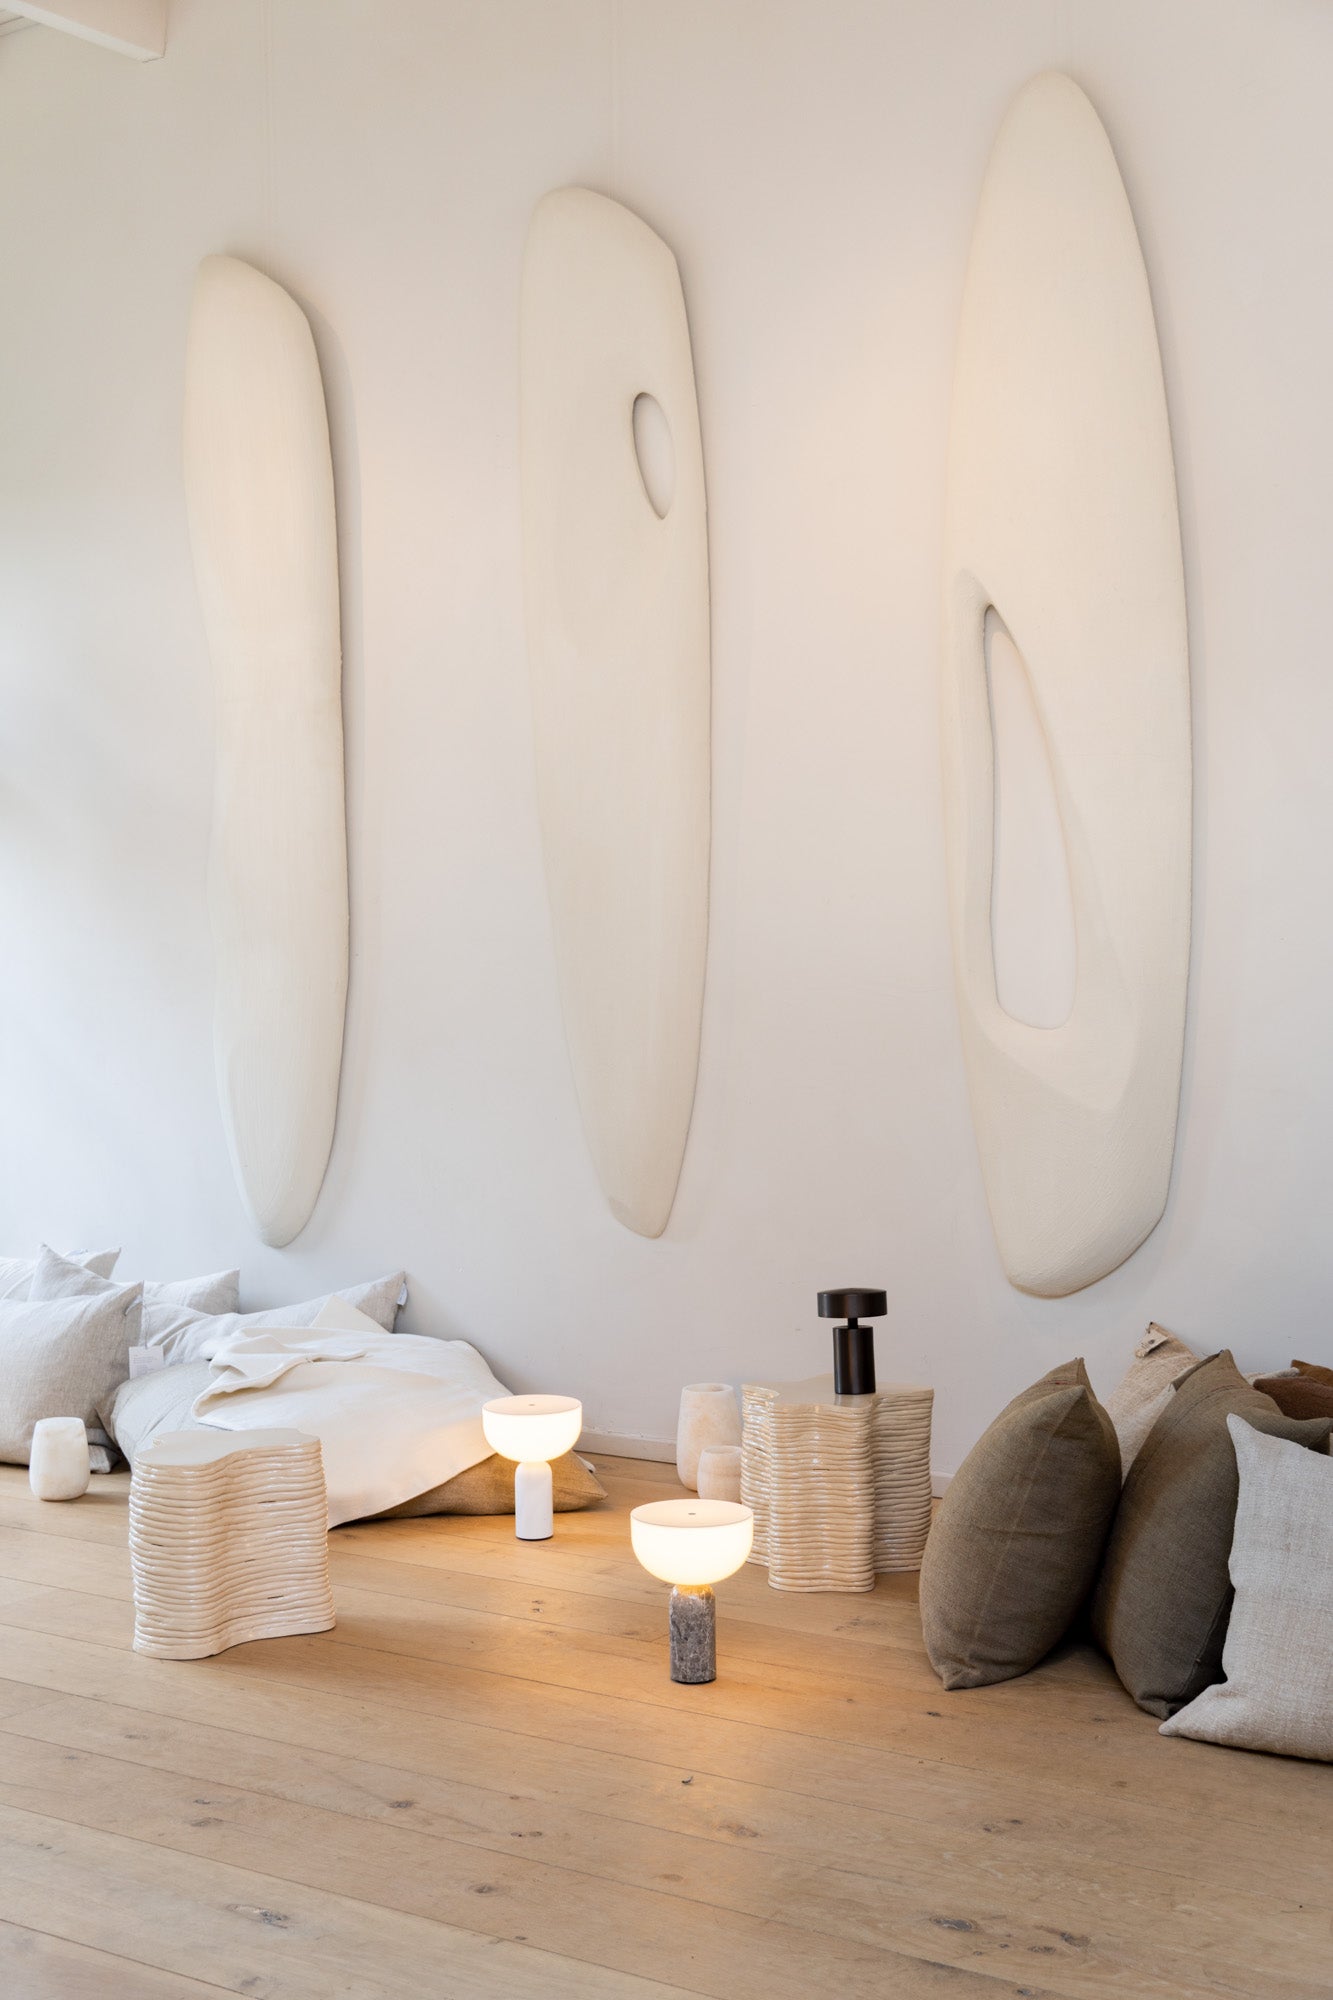 Kizu Portable Lamps used in a light and lofty interior setting with big wall art sculptures at Enter The Loft.